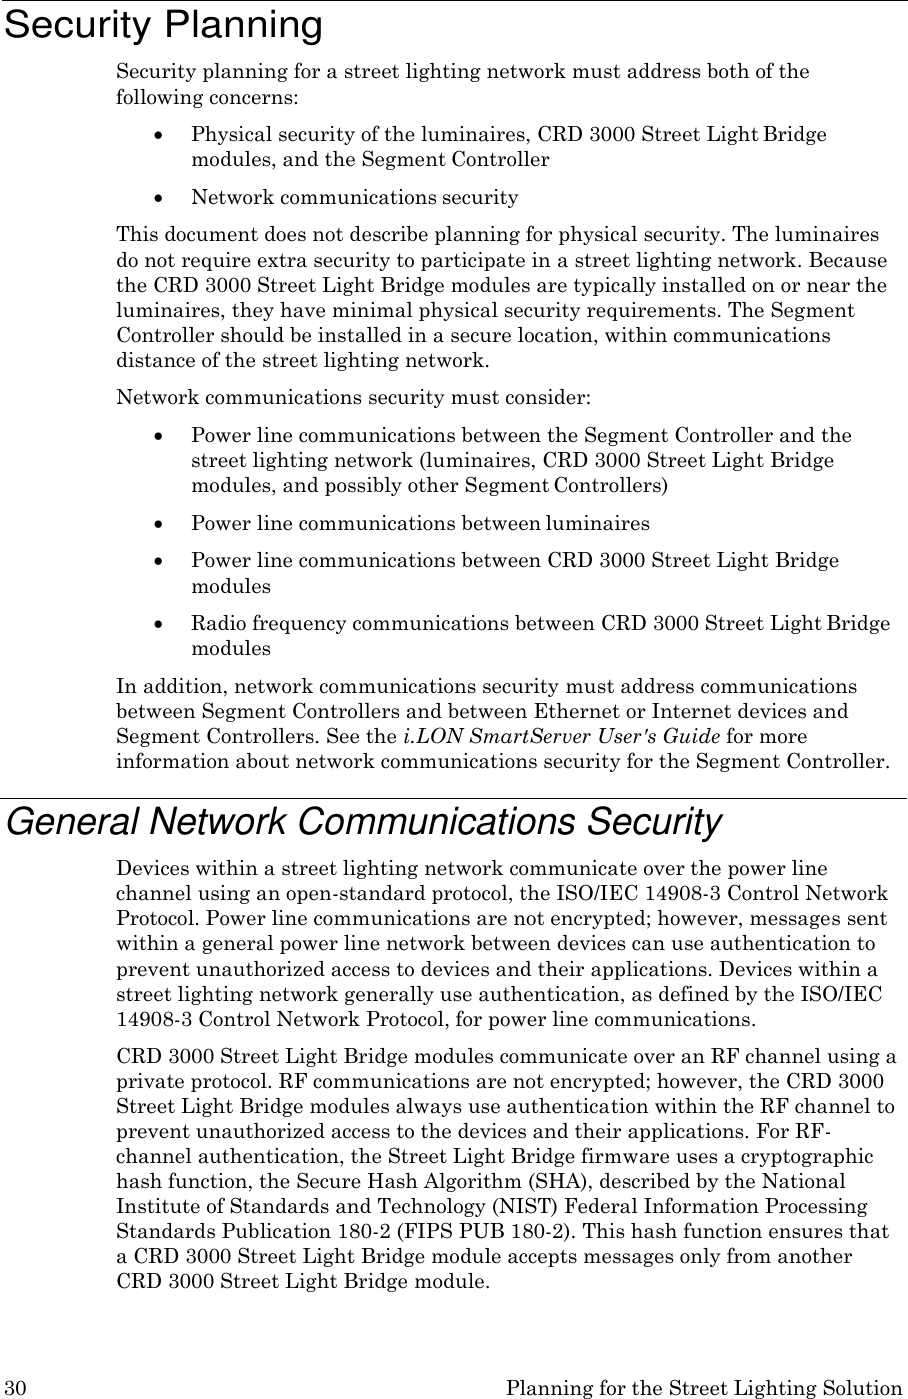 30 Planning for the Street Lighting Solution    Security Planning Security planning for a street lighting network must address both of the following concerns:  Physical security of the luminaires, CRD 3000 Street Light Bridge modules, and the Segment Controller  Network communications security This document does not describe planning for physical security. The luminaires do not require extra security to participate in a street lighting network. Because the CRD 3000 Street Light Bridge modules are typically installed on or near the luminaires, they have minimal physical security requirements. The Segment Controller should be installed in a secure location, within communications distance of the street lighting network. Network communications security must consider:  Power line communications between the Segment Controller and the street lighting network (luminaires, CRD 3000 Street Light Bridge modules, and possibly other Segment Controllers)  Power line communications between luminaires  Power line communications between CRD 3000 Street Light Bridge modules  Radio frequency communications between CRD 3000 Street Light Bridge modules In addition, network communications security must address communications between Segment Controllers and between Ethernet or Internet devices and Segment Controllers. See the i.LON SmartServer User&apos;s Guide for more information about network communications security for the Segment Controller.  General Network Communications Security Devices within a street lighting network communicate over the power line channel using an open-standard protocol, the ISO/IEC 14908-3 Control Network Protocol. Power line communications are not encrypted; however, messages sent within a general power line network between devices can use authentication to prevent unauthorized access to devices and their applications. Devices within a street lighting network generally use authentication, as defined by the ISO/IEC 14908-3 Control Network Protocol, for power line communications. CRD 3000 Street Light Bridge modules communicate over an RF channel using a private protocol. RF communications are not encrypted; however, the CRD 3000 Street Light Bridge modules always use authentication within the RF channel to prevent unauthorized access to the devices and their applications. For RF- channel authentication, the Street Light Bridge firmware uses a cryptographic hash function, the Secure Hash Algorithm (SHA), described by the National Institute of Standards and Technology (NIST) Federal Information Processing Standards Publication 180-2 (FIPS PUB 180-2). This hash function ensures that a CRD 3000 Street Light Bridge module accepts messages only from another CRD 3000 Street Light Bridge module. 